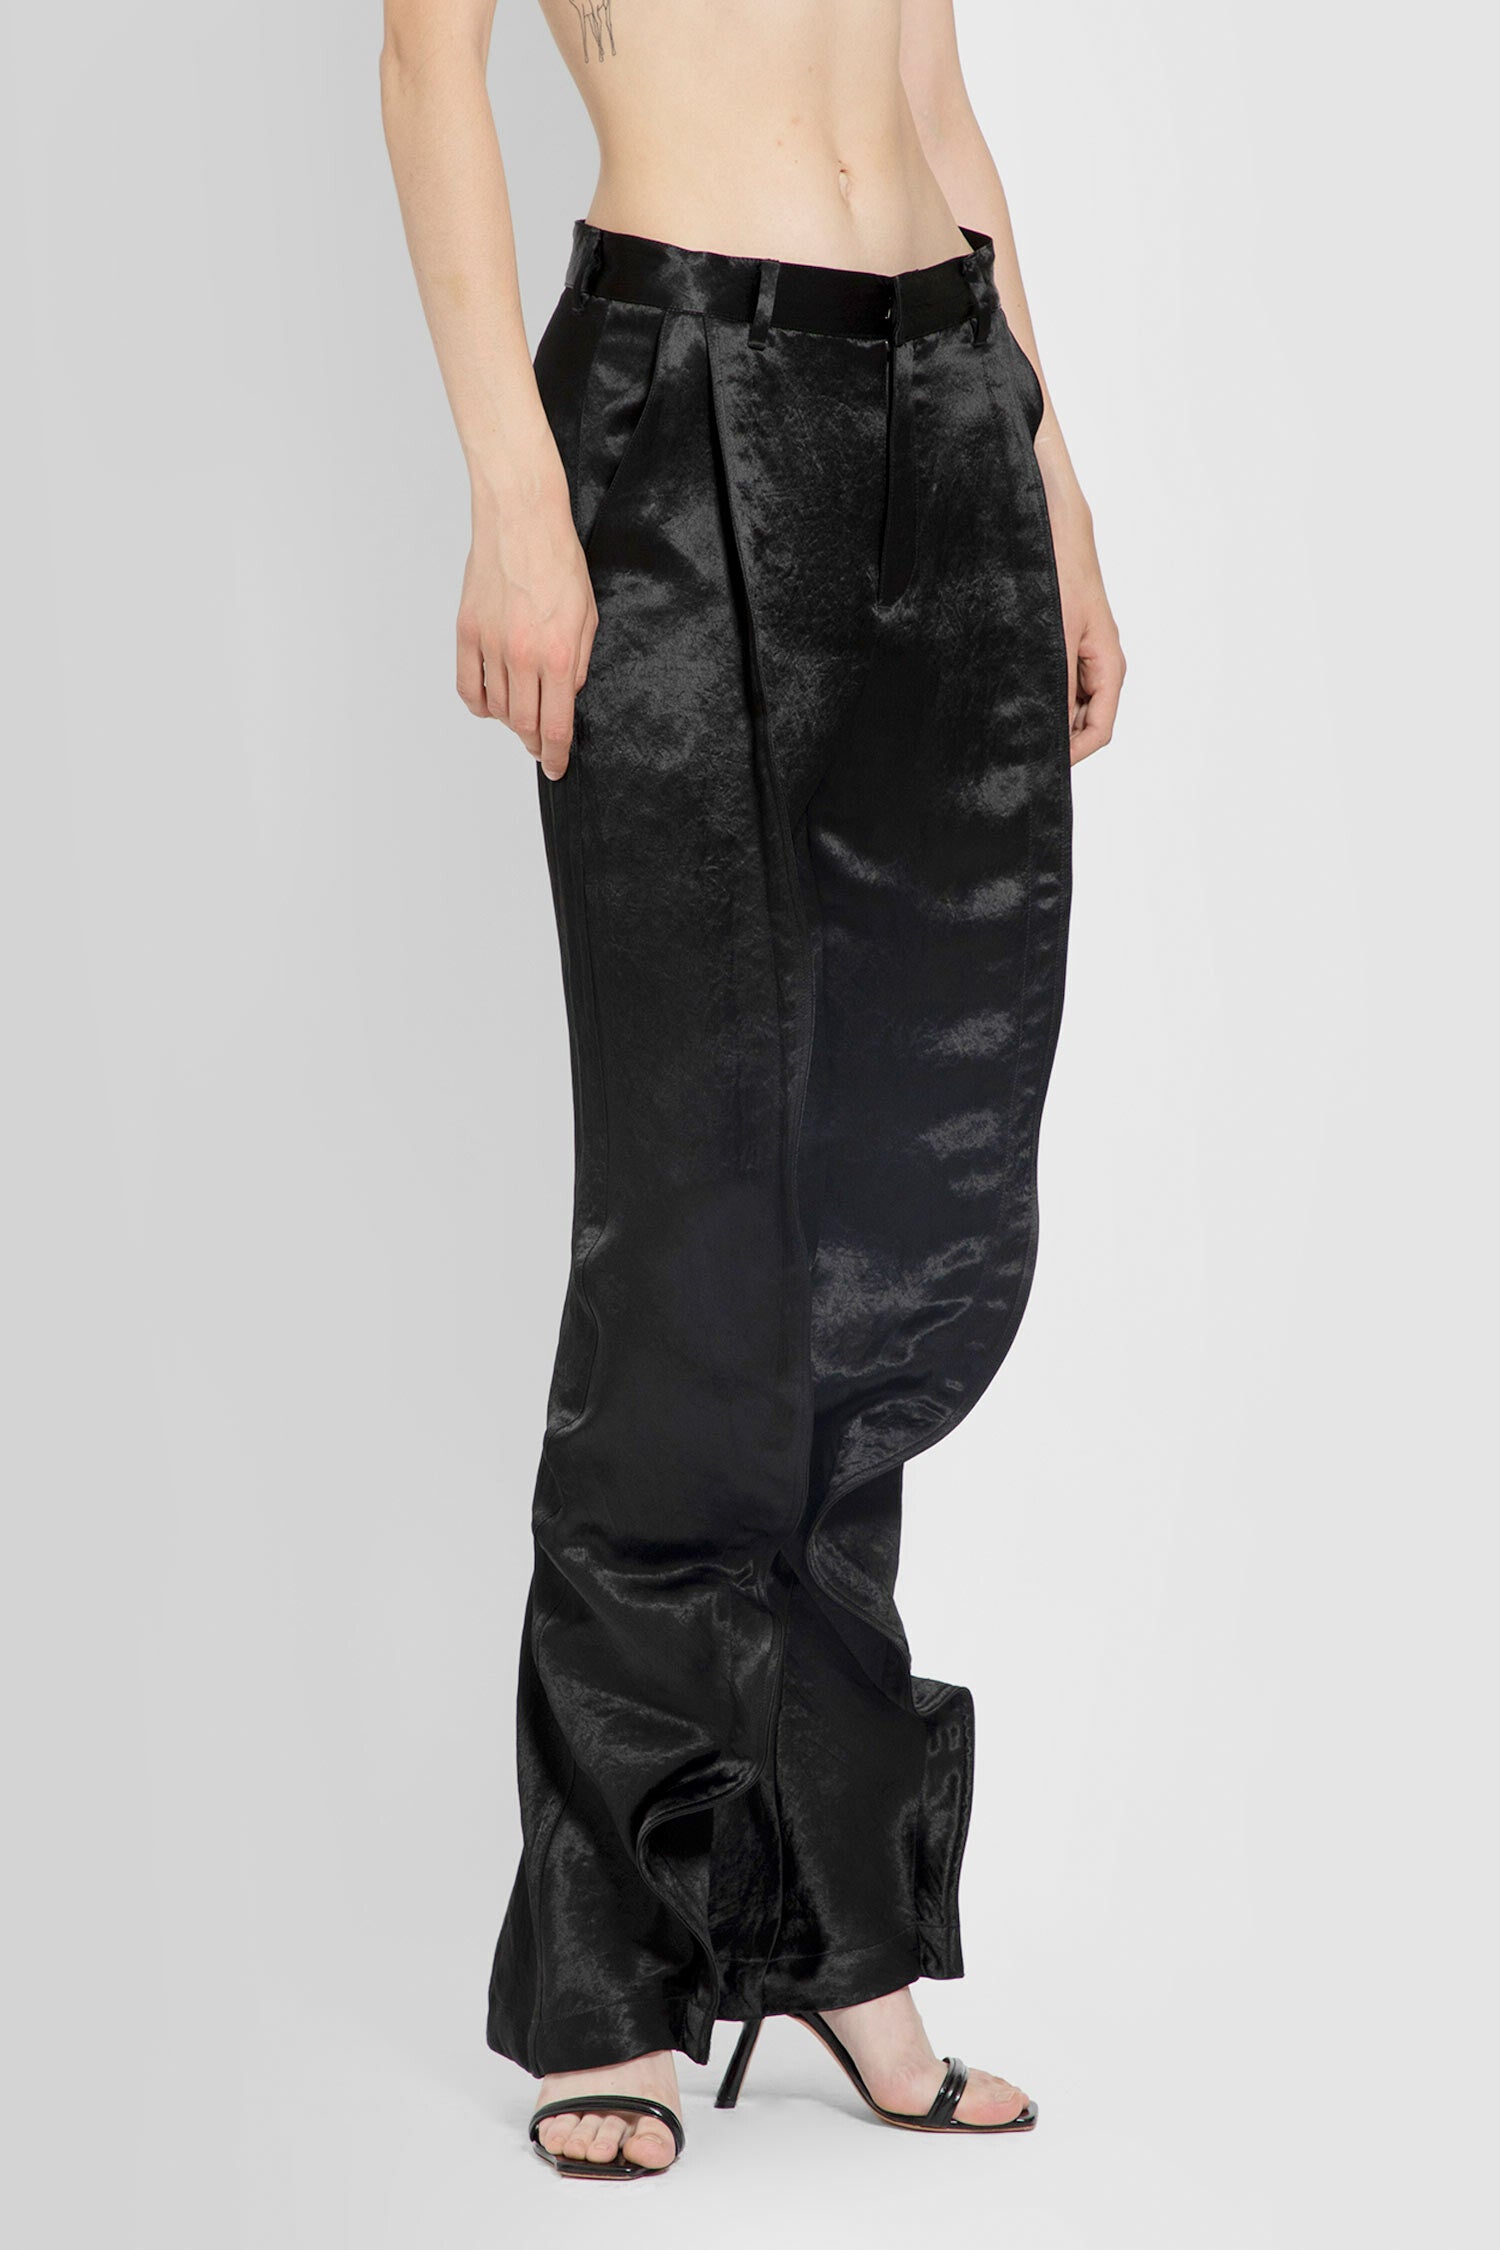 Y/PROJECT WOMAN BLACK TROUSERS